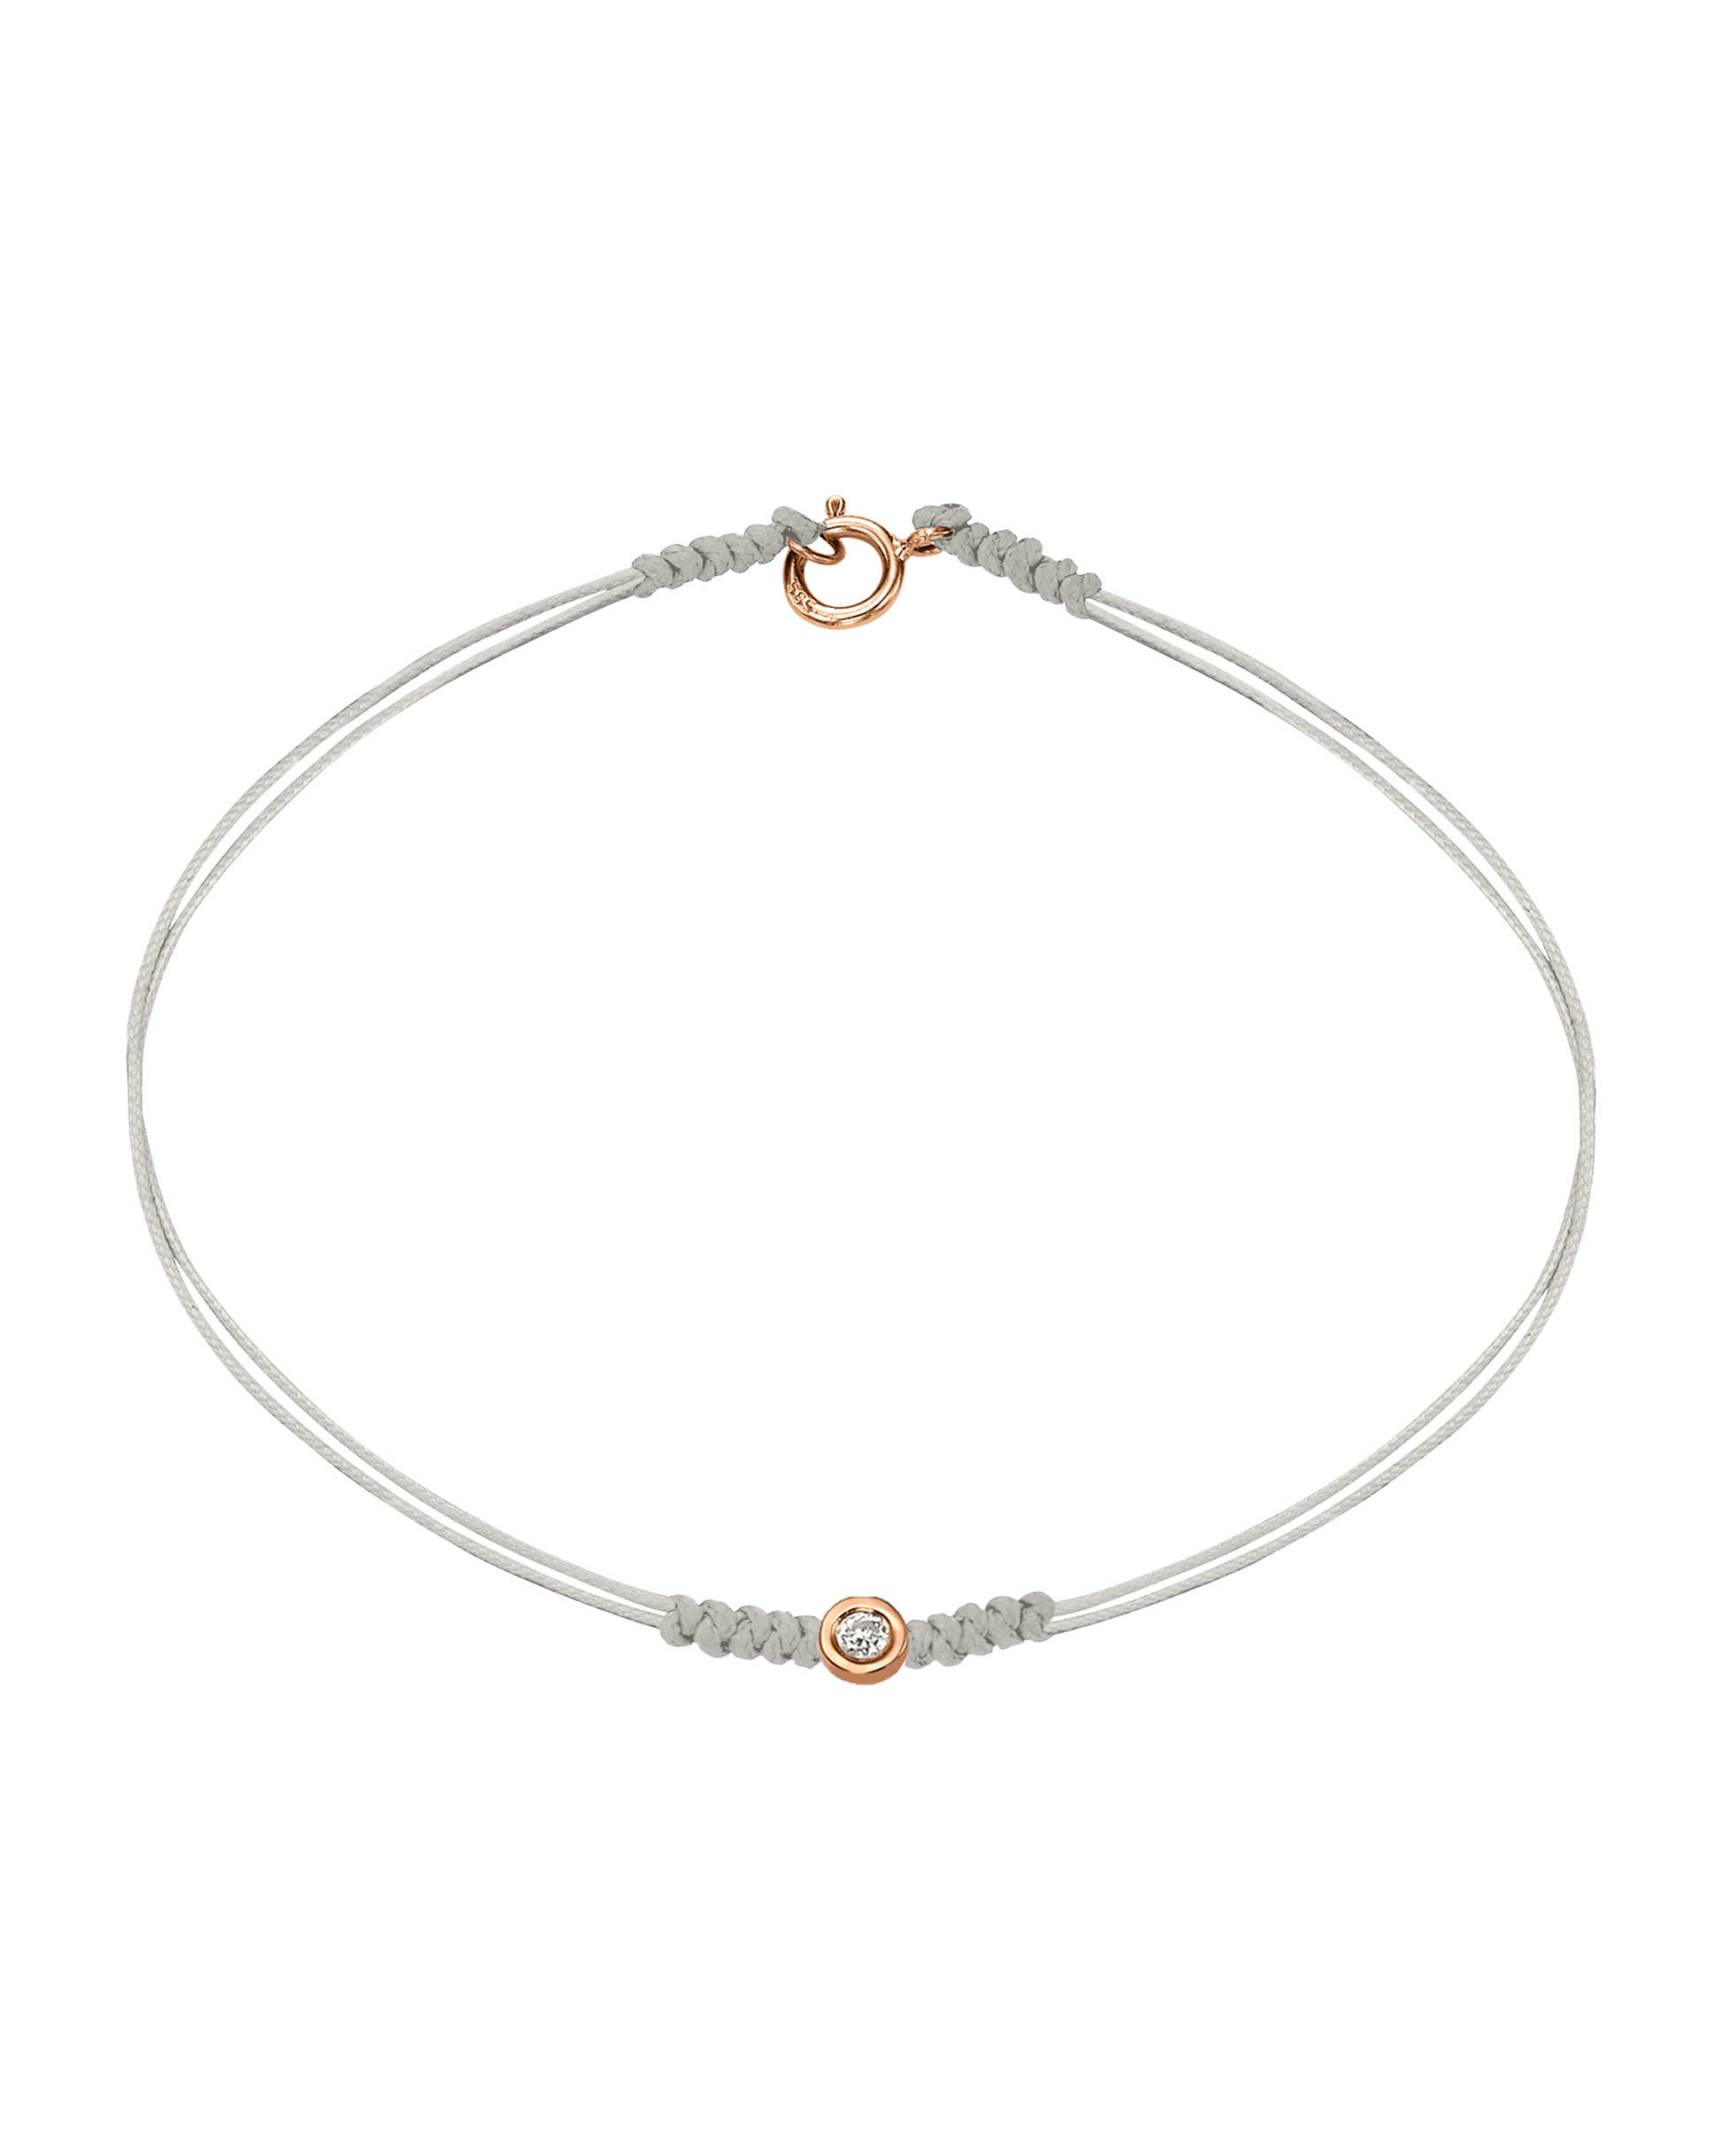 The Classic String of Love with clasp - 14K Rose Gold Bracelets 14K Solid Gold Pearl Small: 0.03ct Small - 6 Inches (15.5cm)